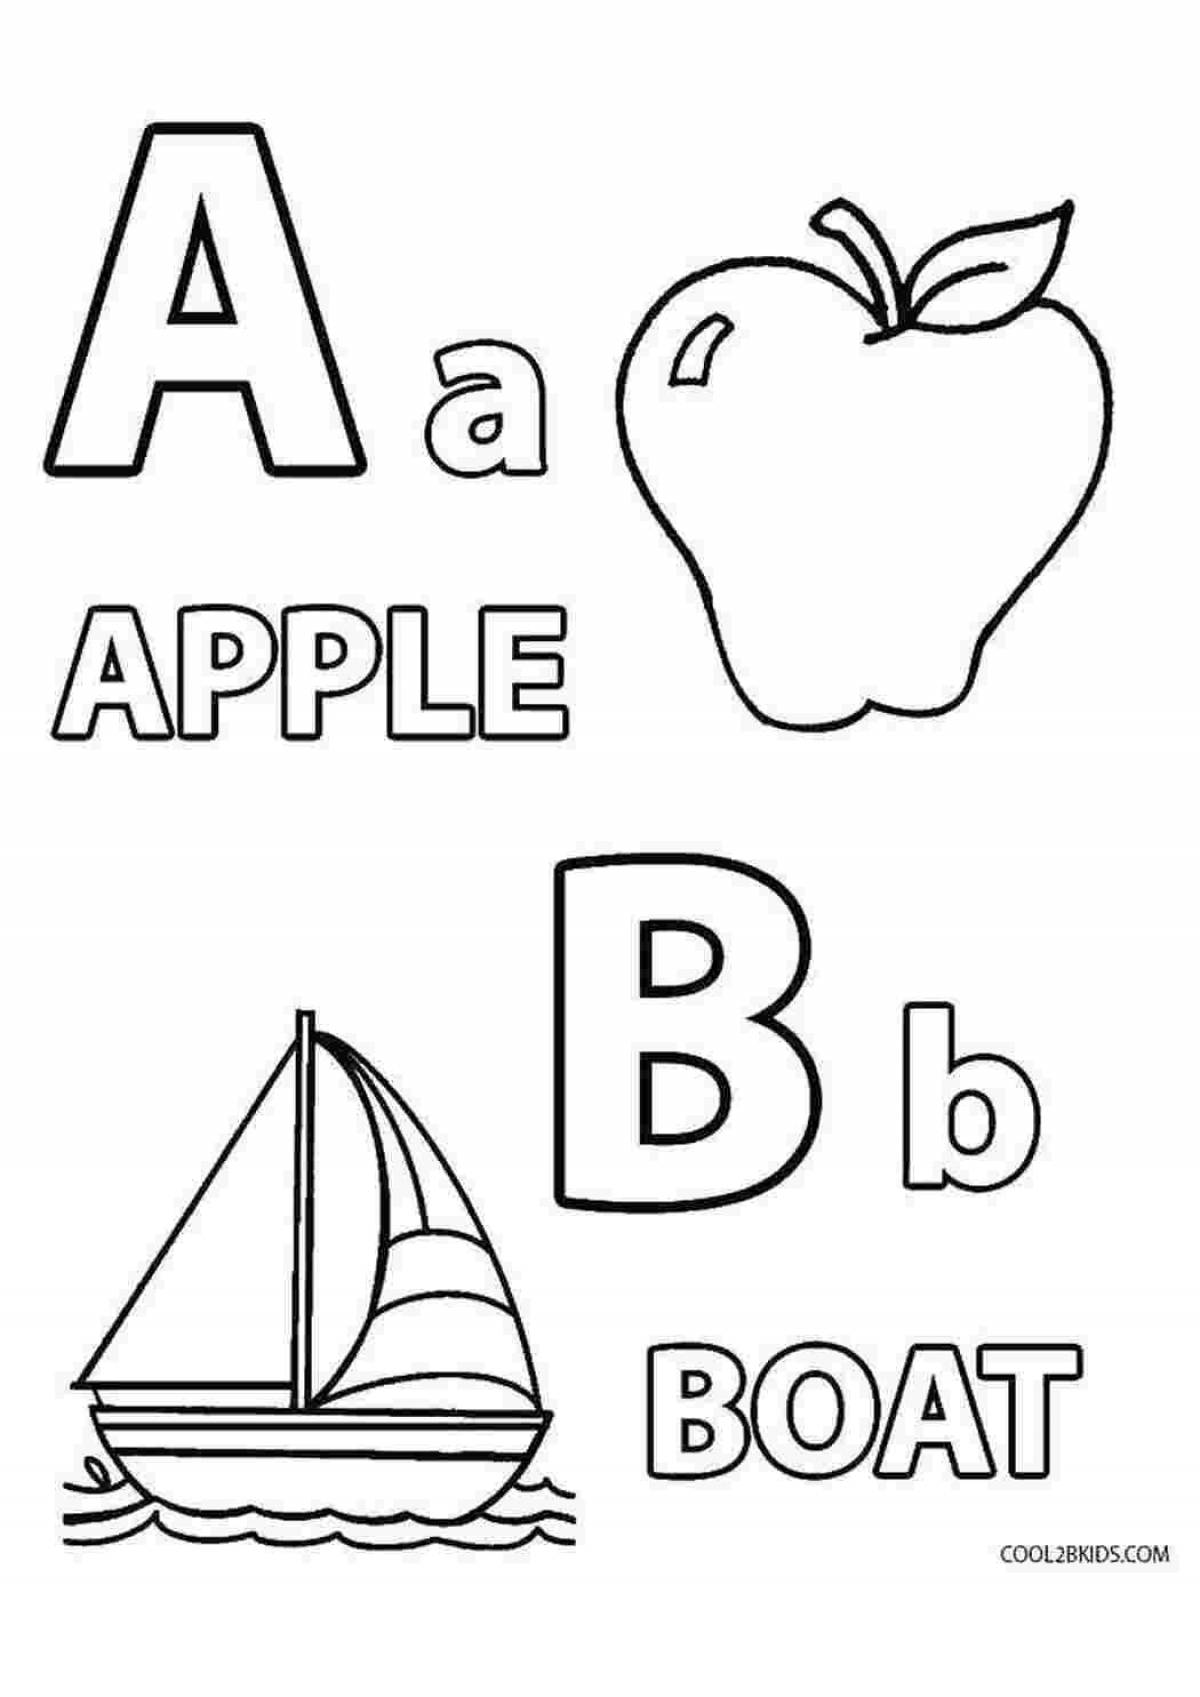 Animated English alphabet coloring page